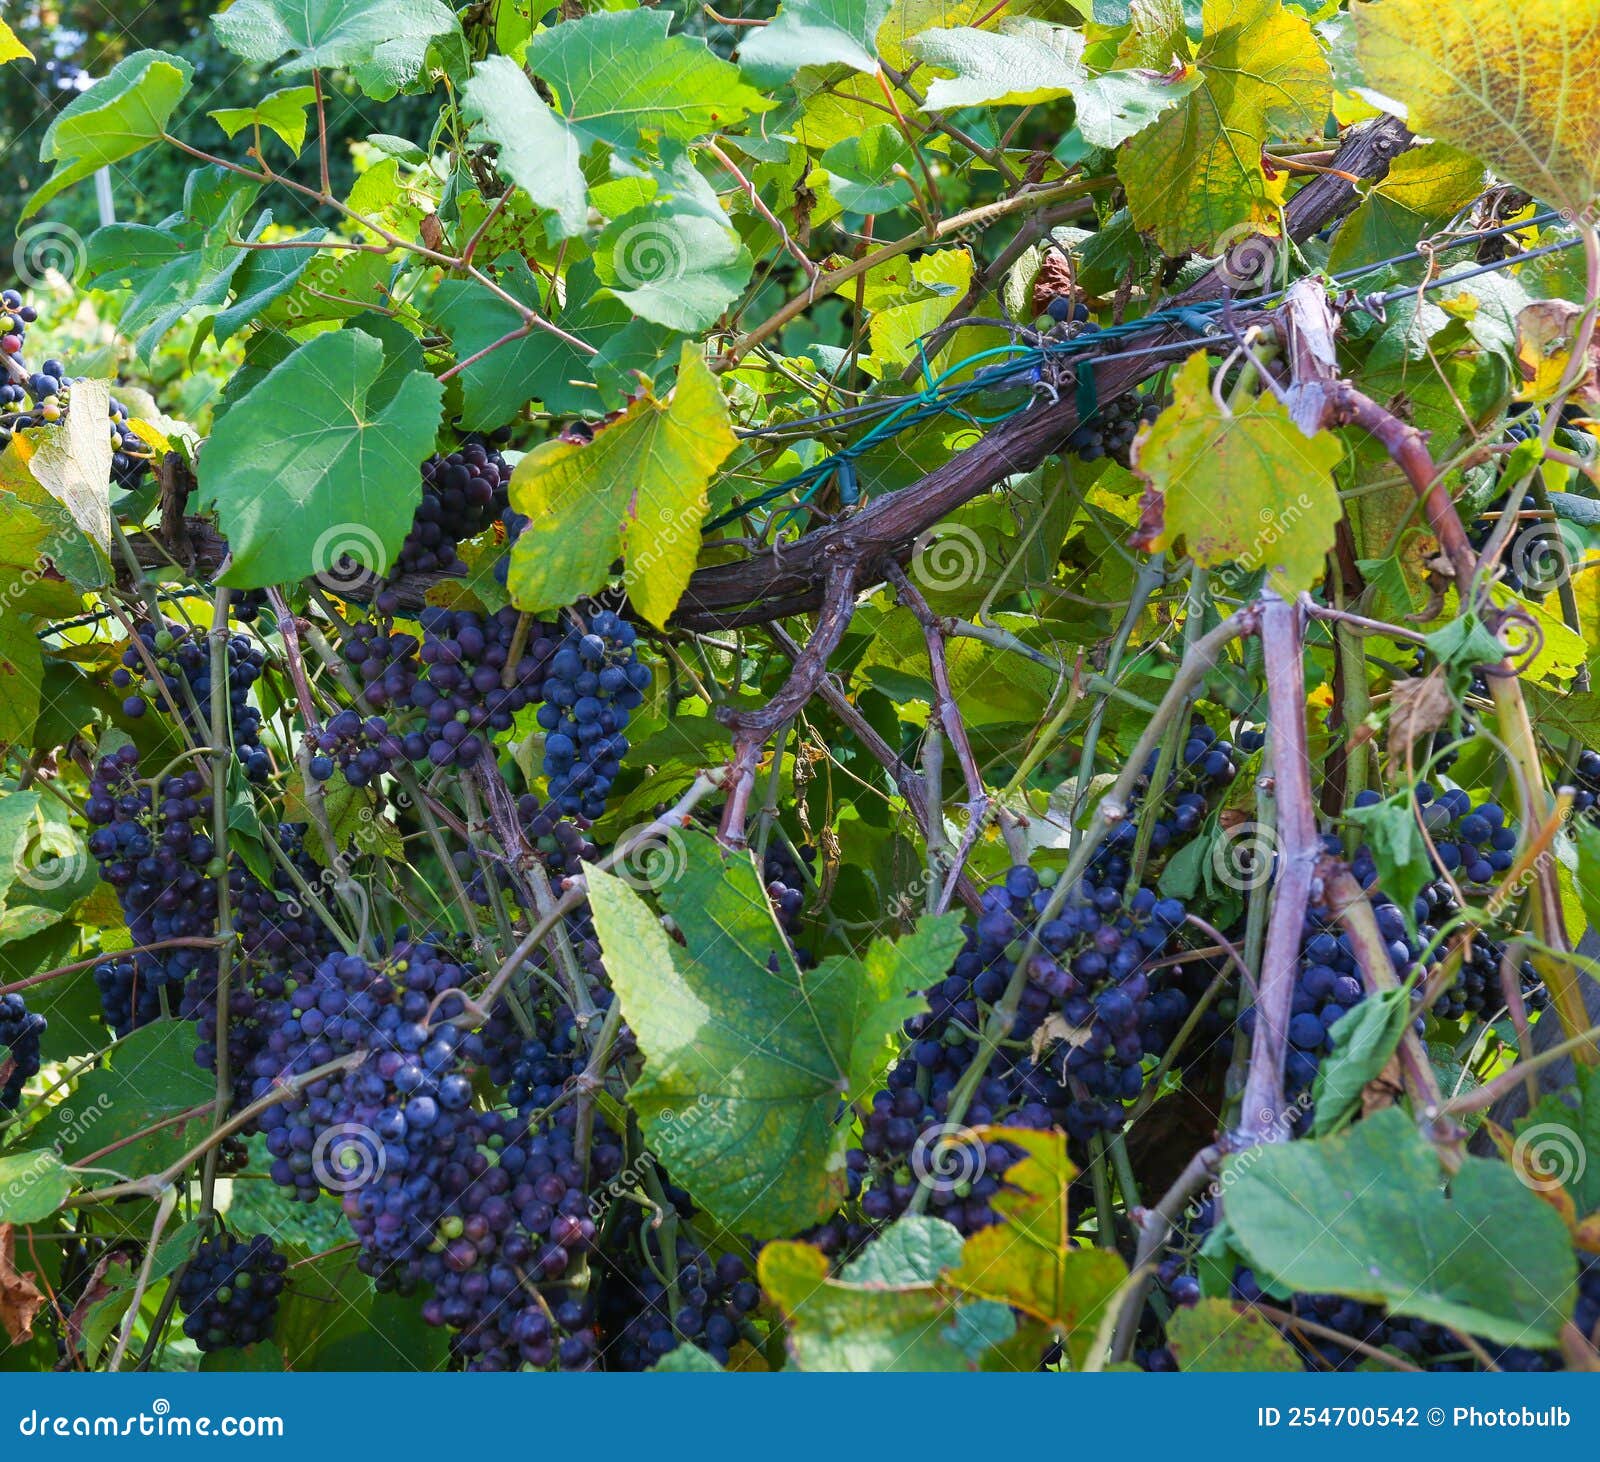 bunches of ripe grapes in the late summer in loudon county, virginia